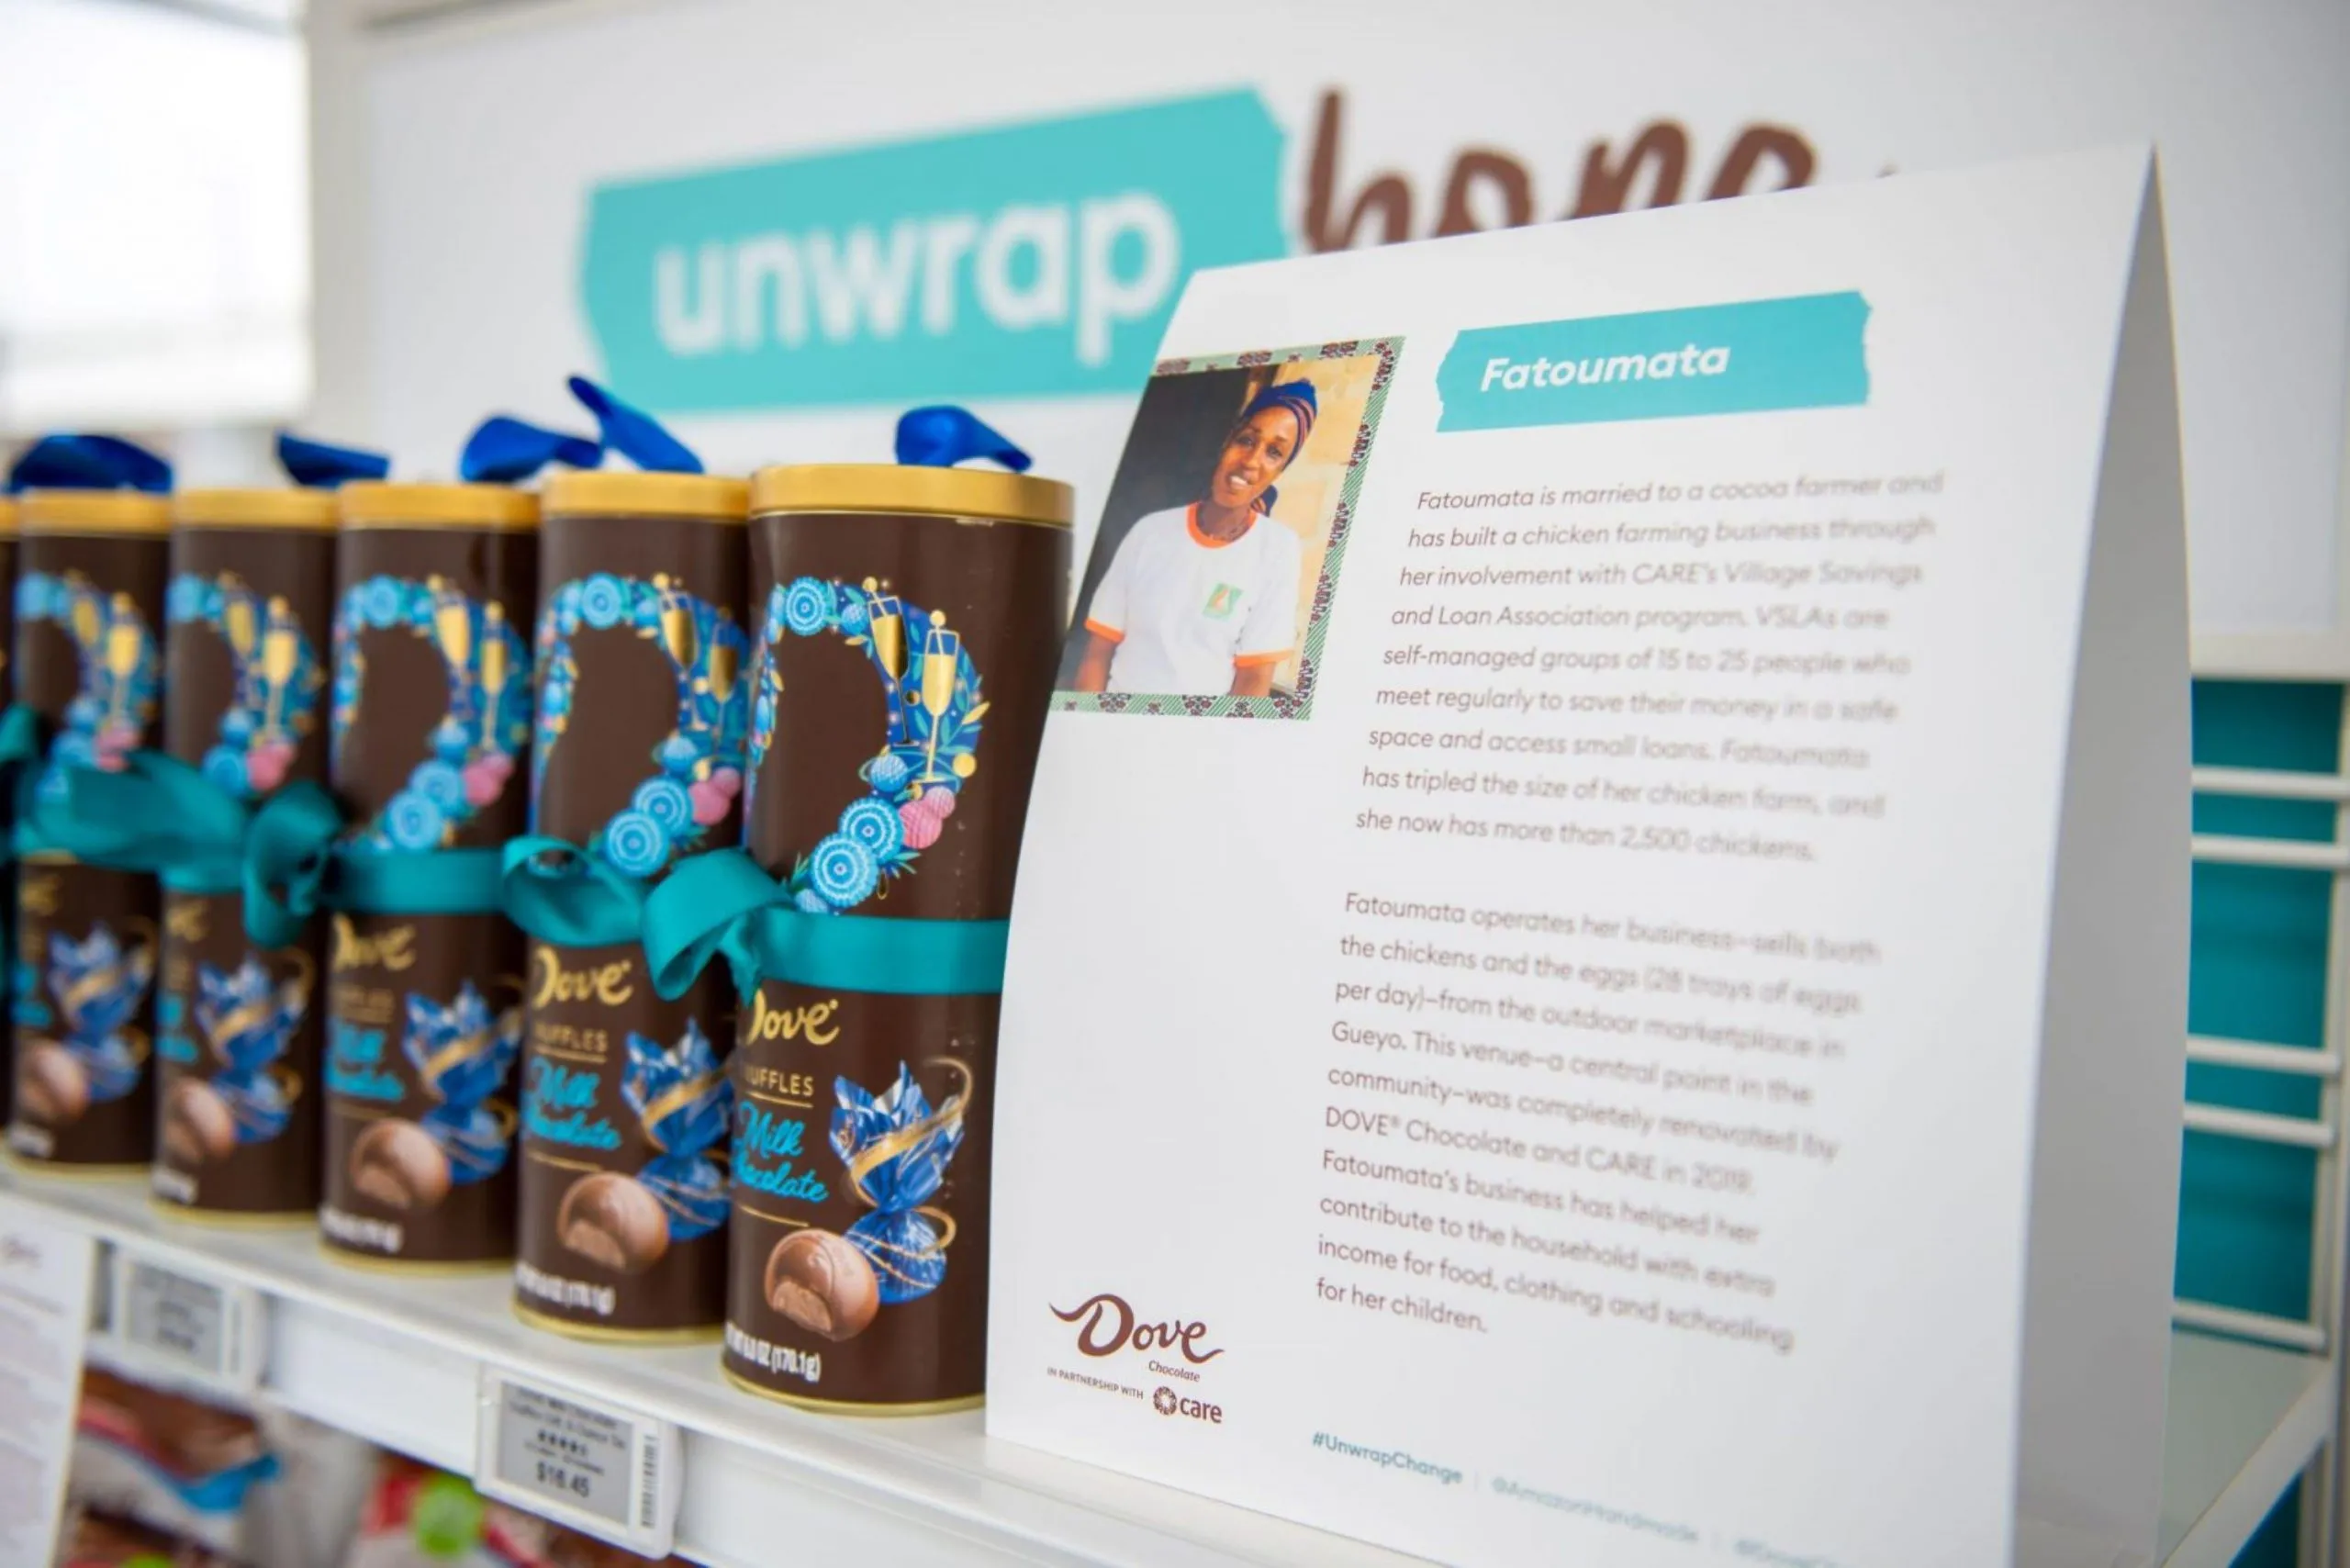 A product image of Dove Milk Chocolate Truffles next to a printed story of Fatoumata, a woman involved with CARE's Village Savings and Loan Associations program.